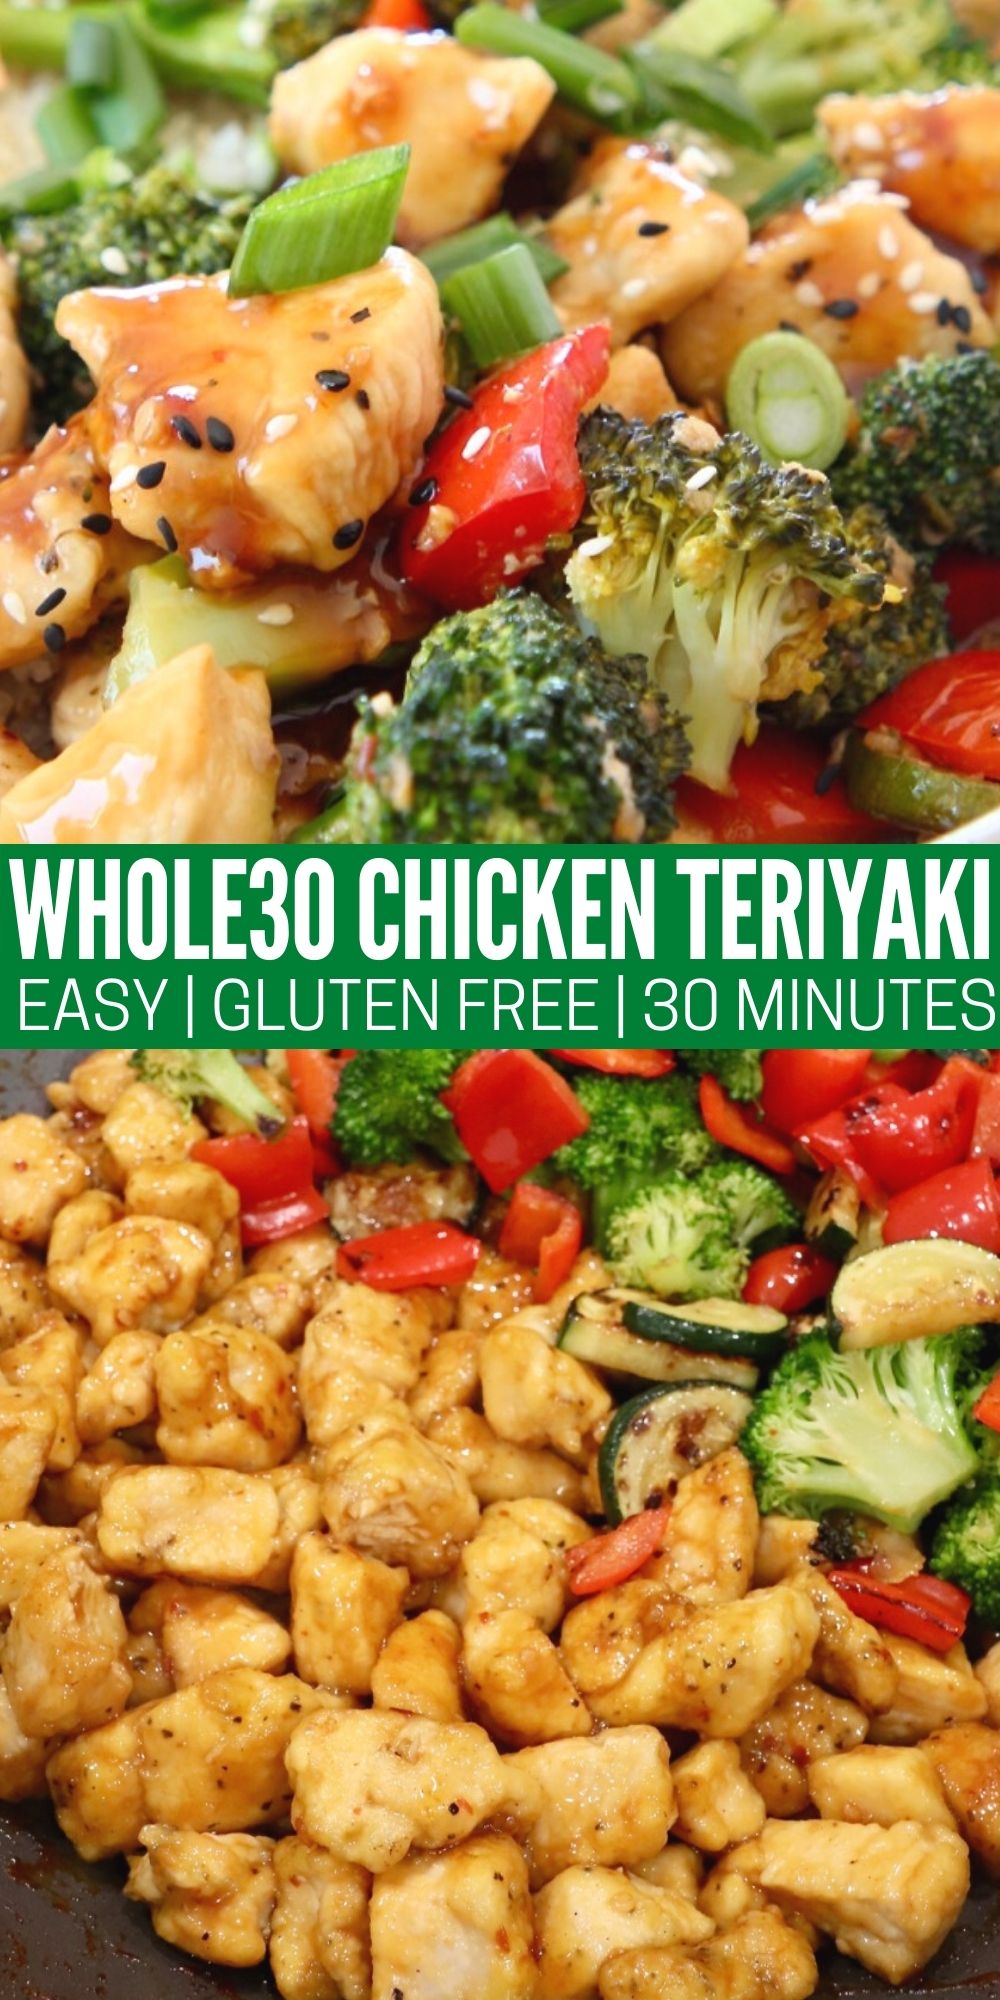 Whole30 Chicken Teriyaki Bowl - Bowls Are The New Plates